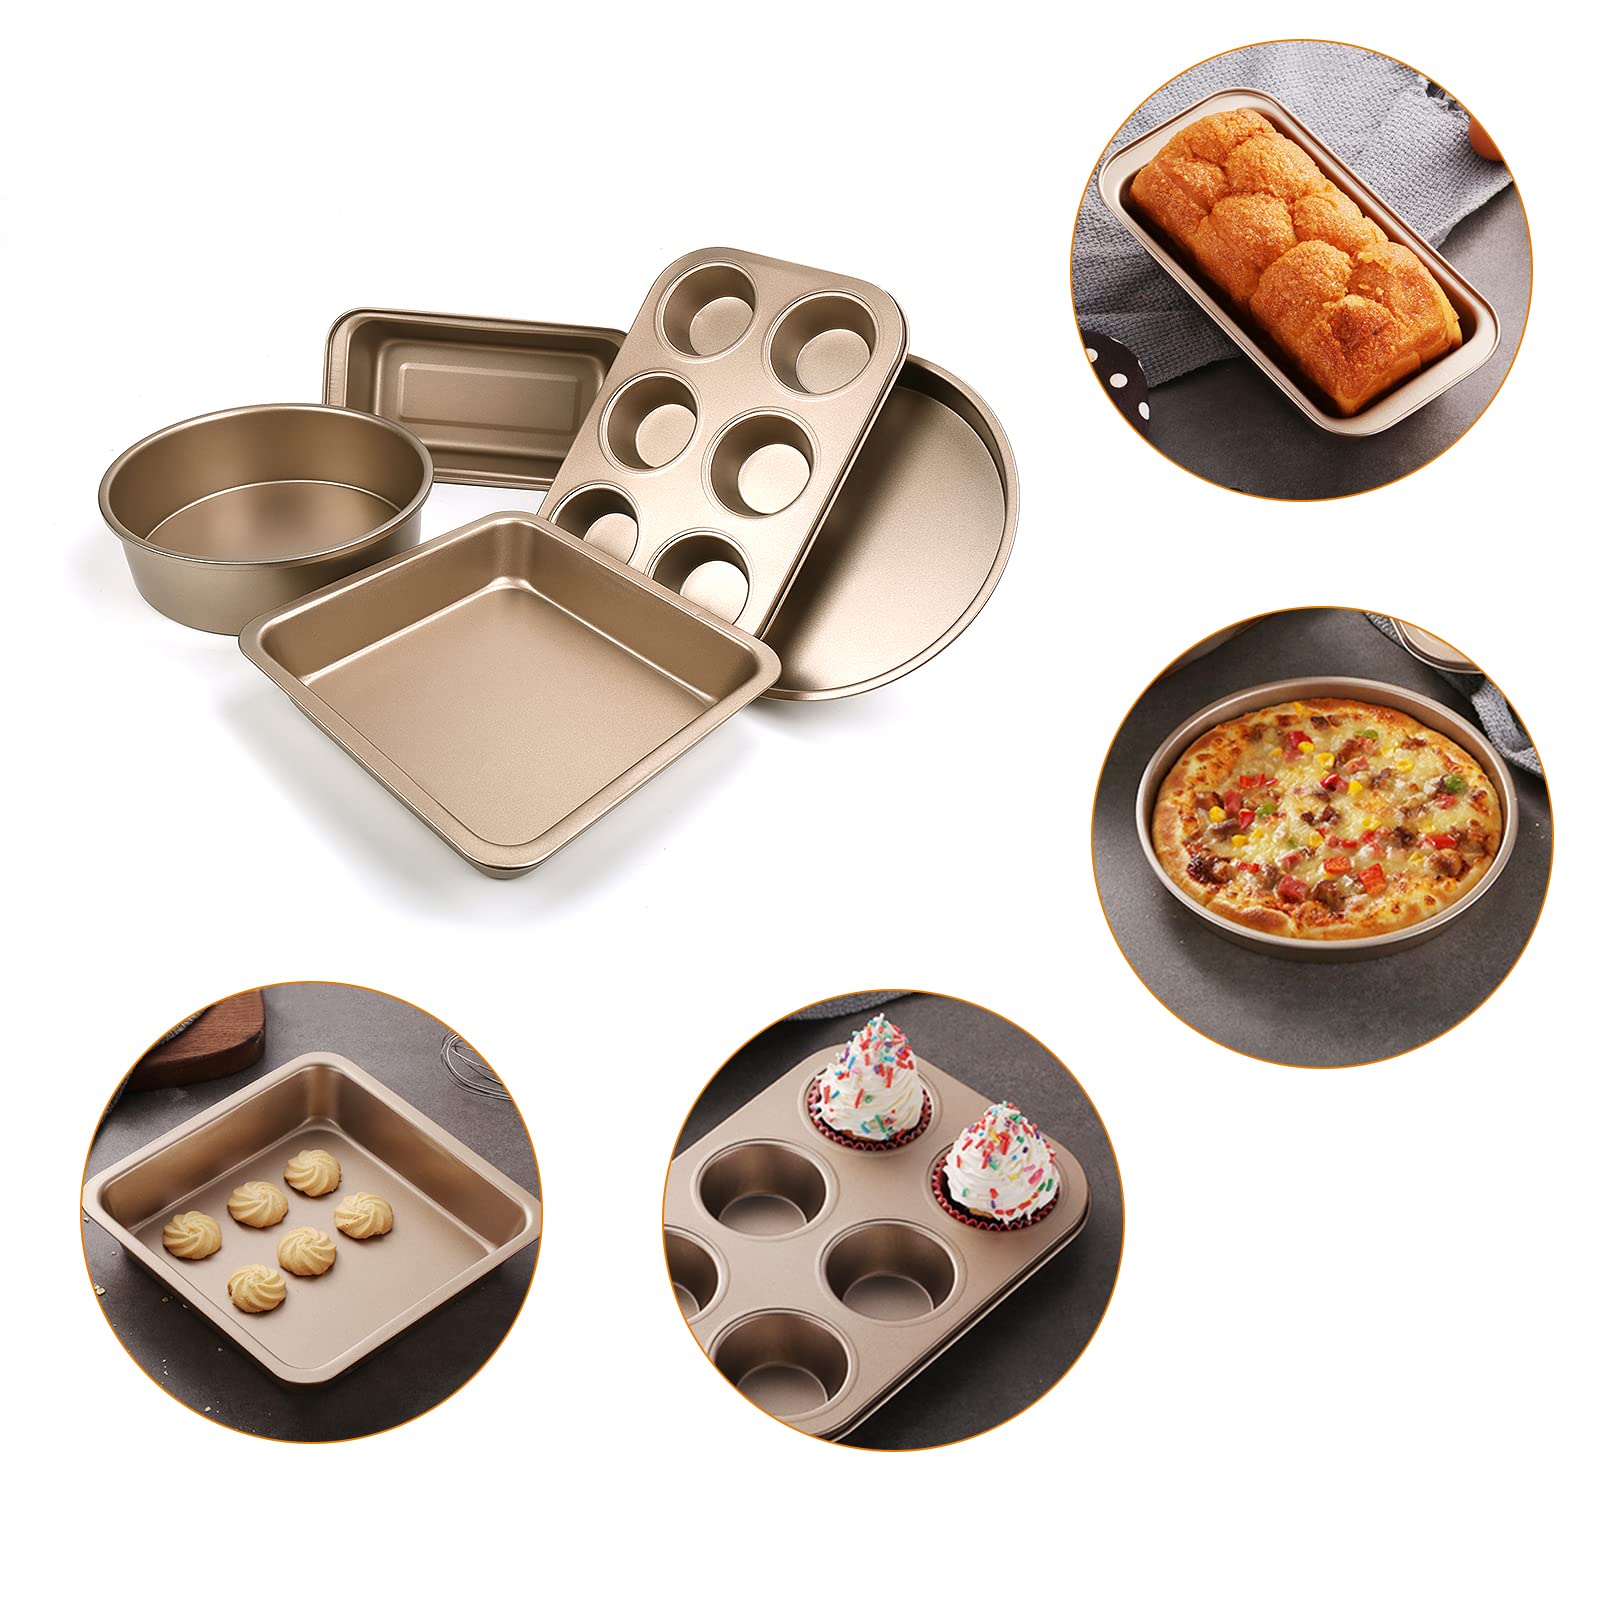 Nonstick Bakeware Sets Baking Pans Set Toaster Oven Trays, Kitchen Baking Essentials with Pizza Pan Cake Pan Bread Loaf Box Muffin Pan Cookie Sheet